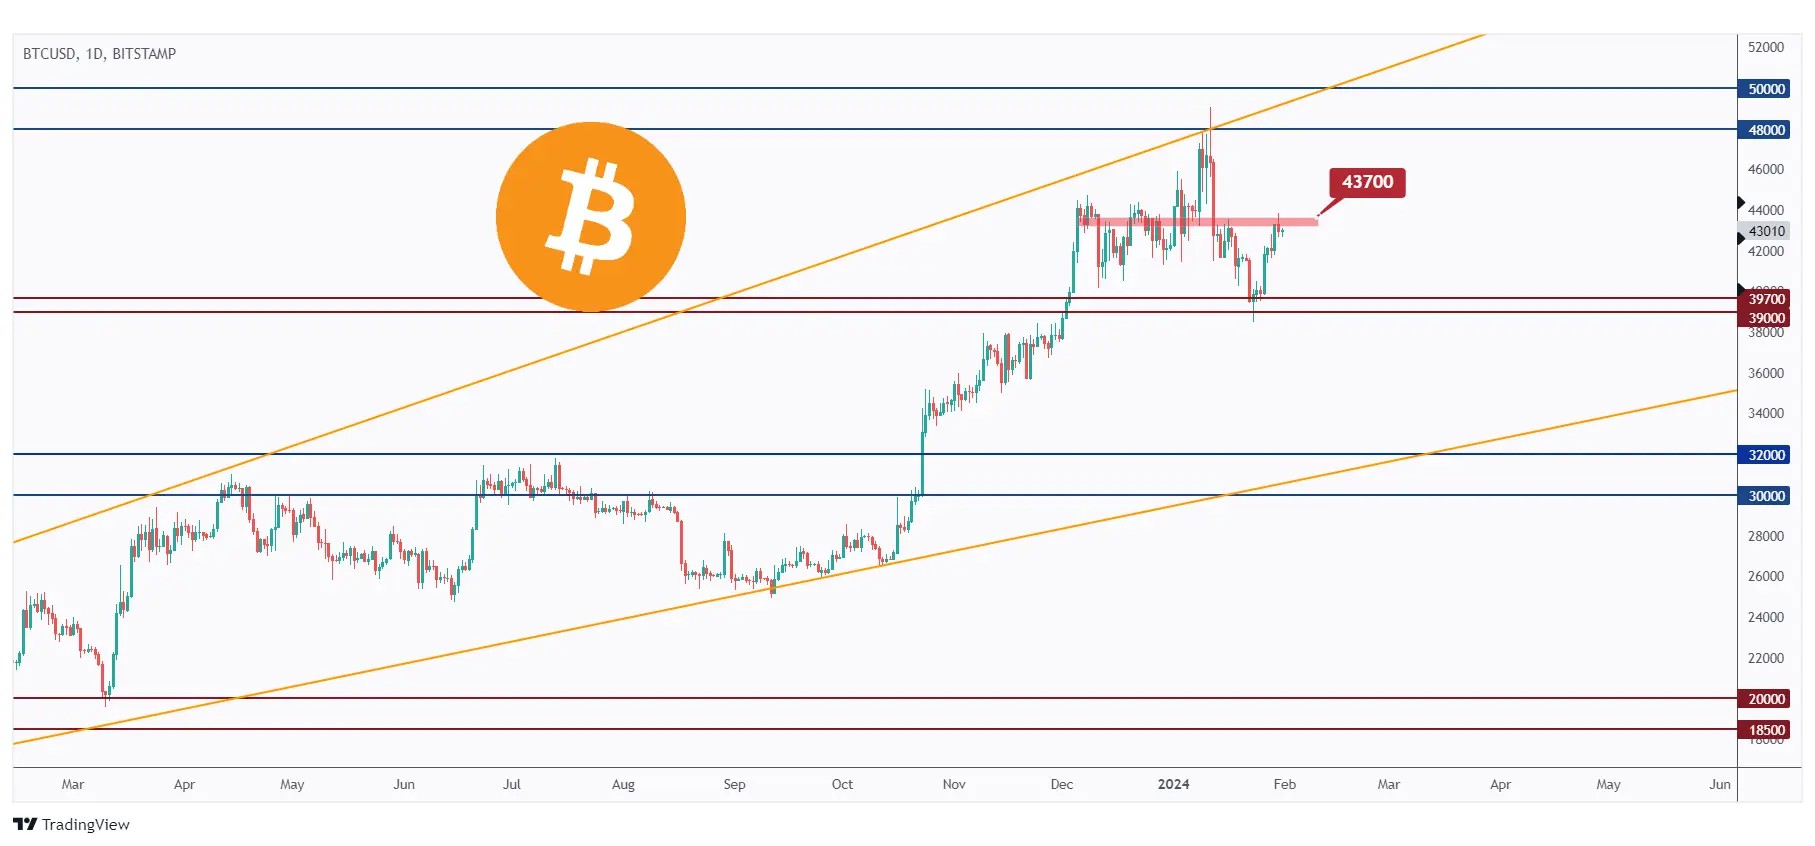 btc daily chart showing the major high at $43,700 that we need a break above for the bulls to take over.